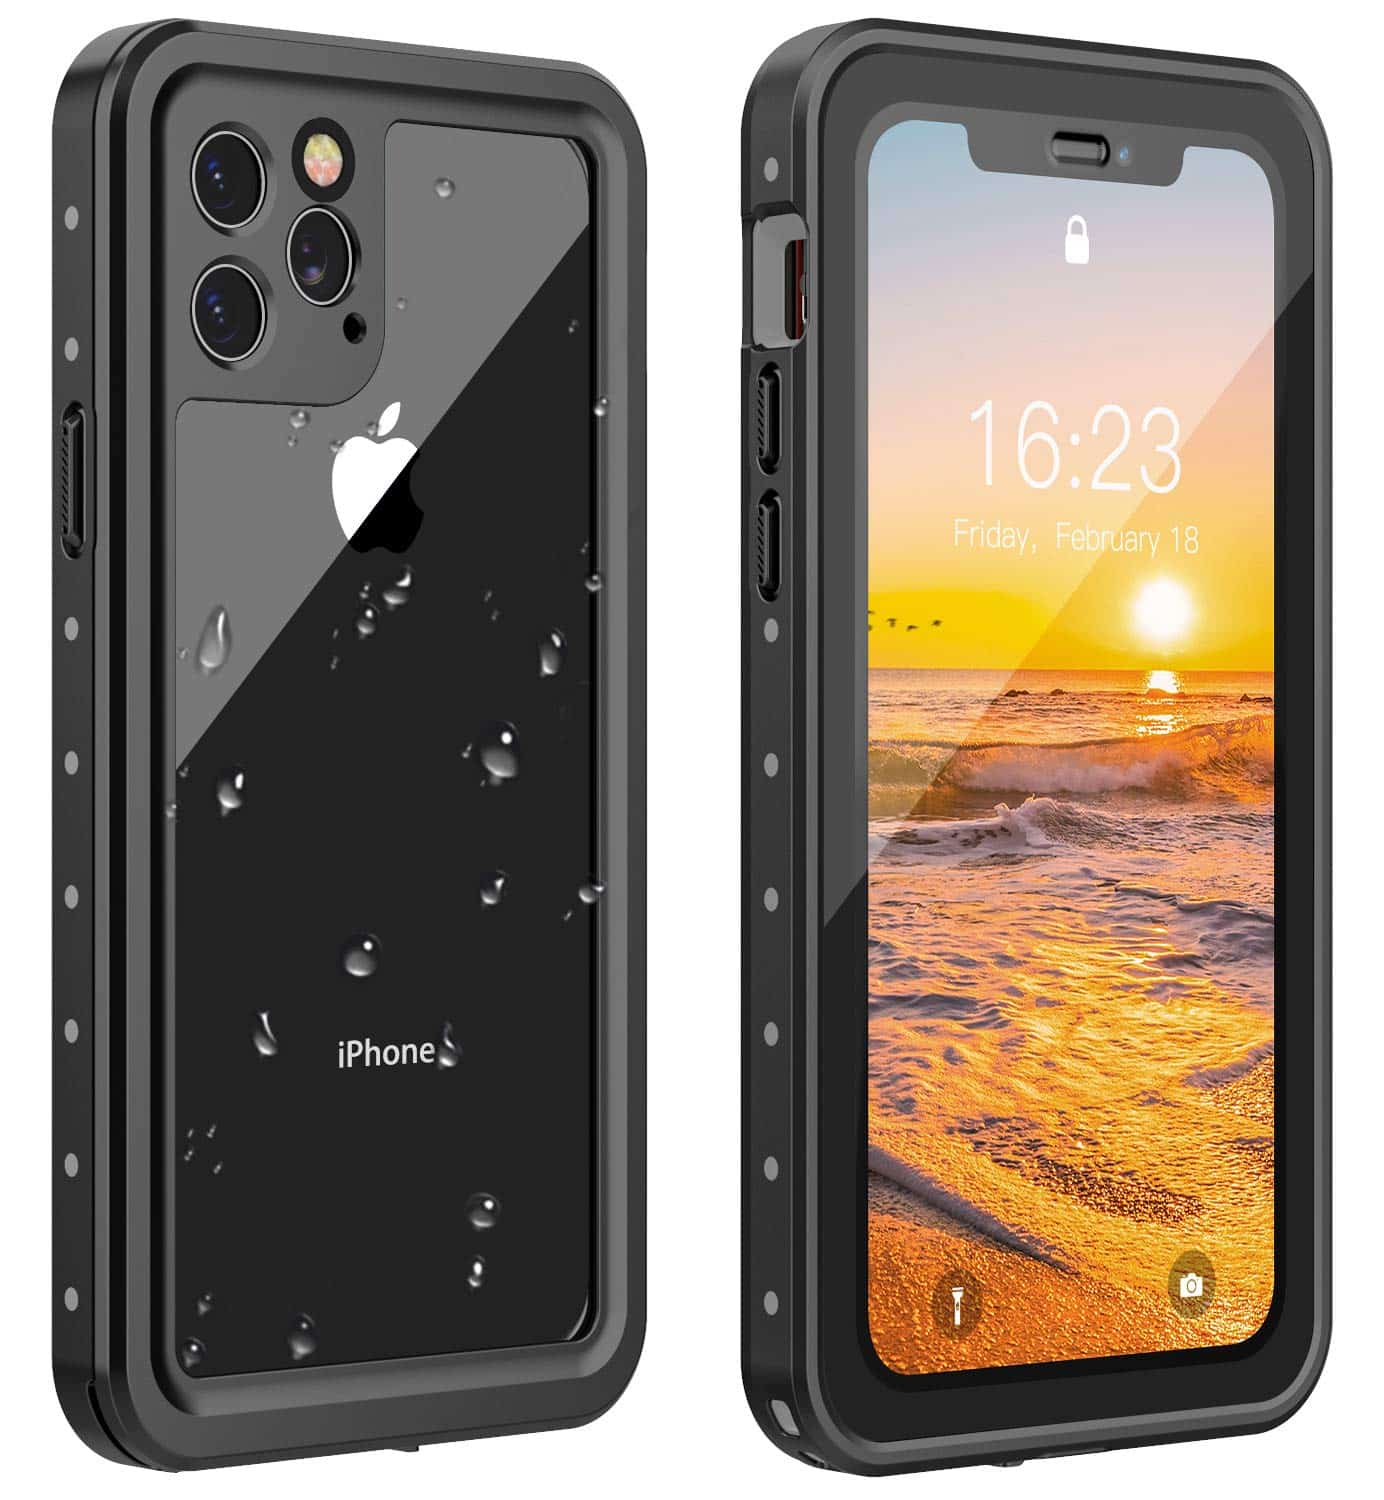 Best Waterproof Cases for iPhone 11 Pro in 2020